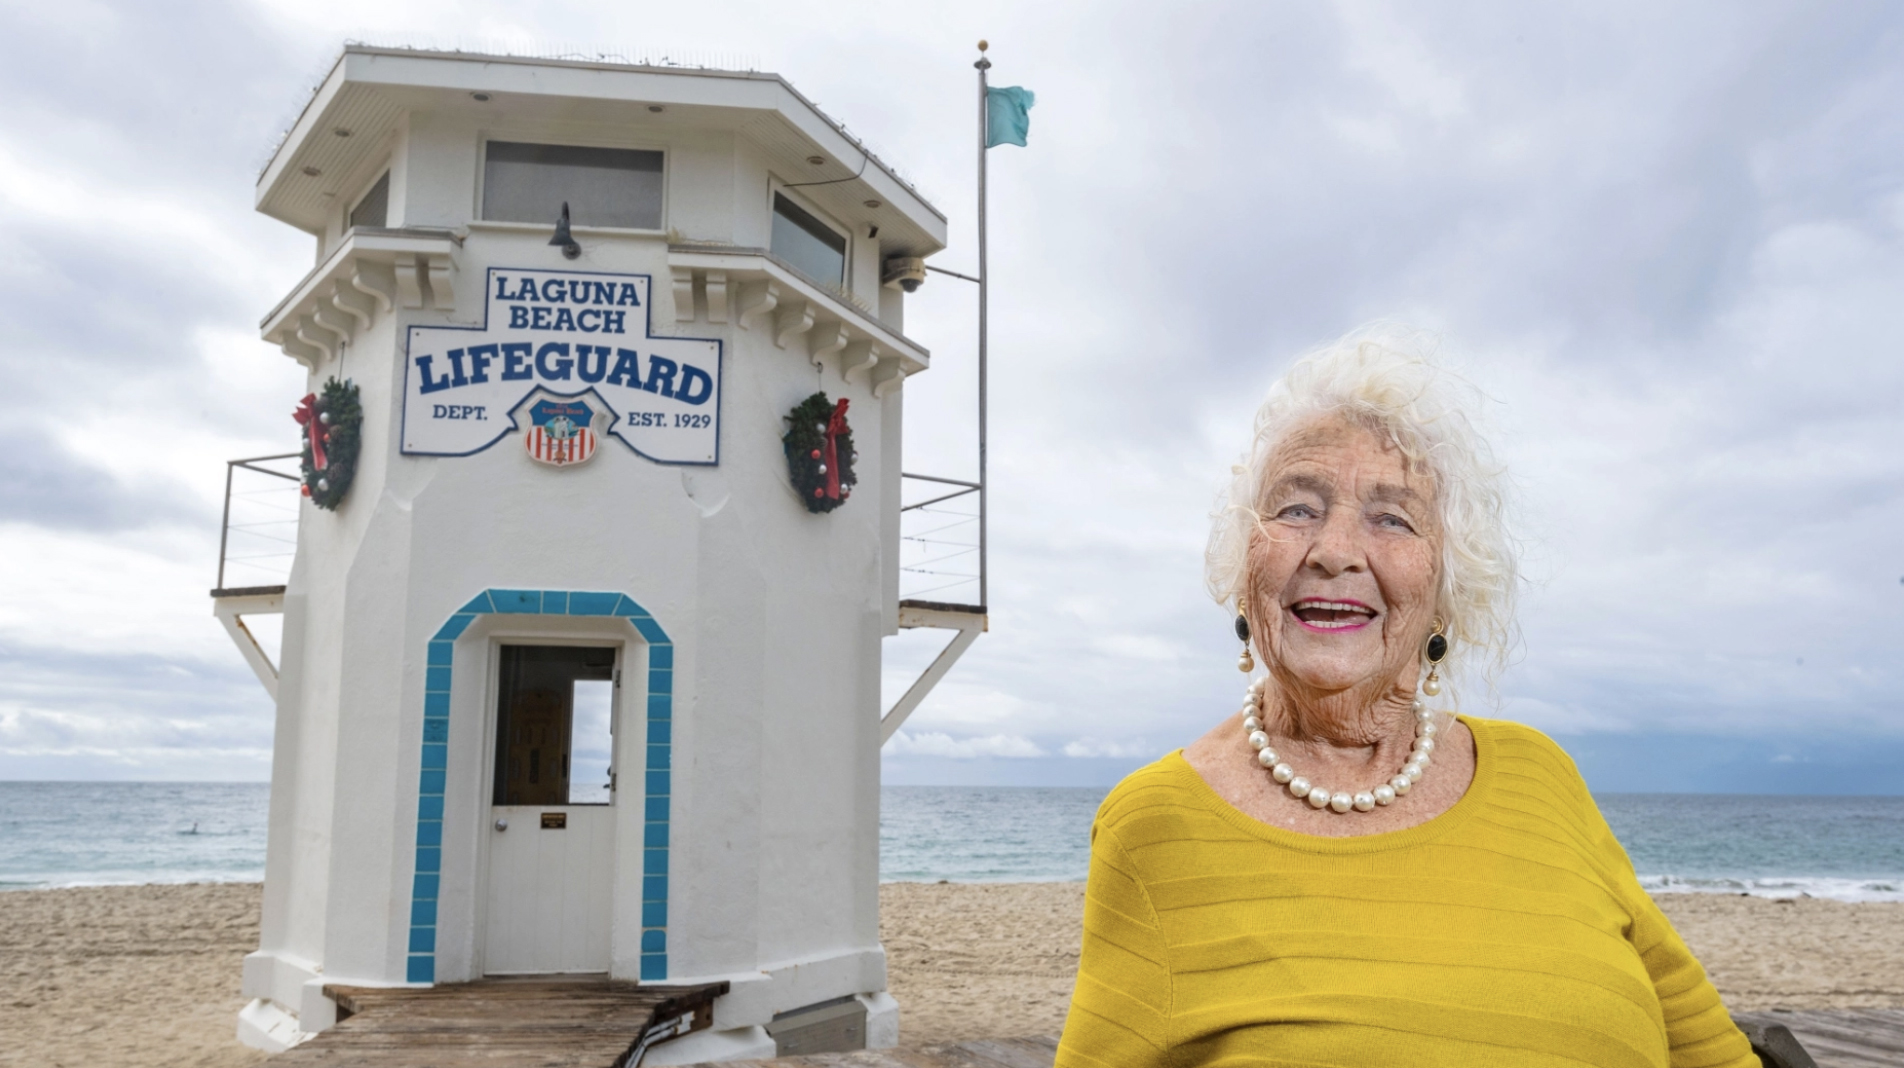 Beth Leeds, of Laguna Beach, a longtime activist and environmentalist, stands next to the lifeguard tower on Main Beach in Laguna Beach on Wednesday, December 29, 2021. Leeds was one of the people that helped save the lifeguard tower from destruction 50 years ago when the city removed the structures there to create the present day boardwalk. (Photo by Mark Rightmire, Orange County Register/SCNG)